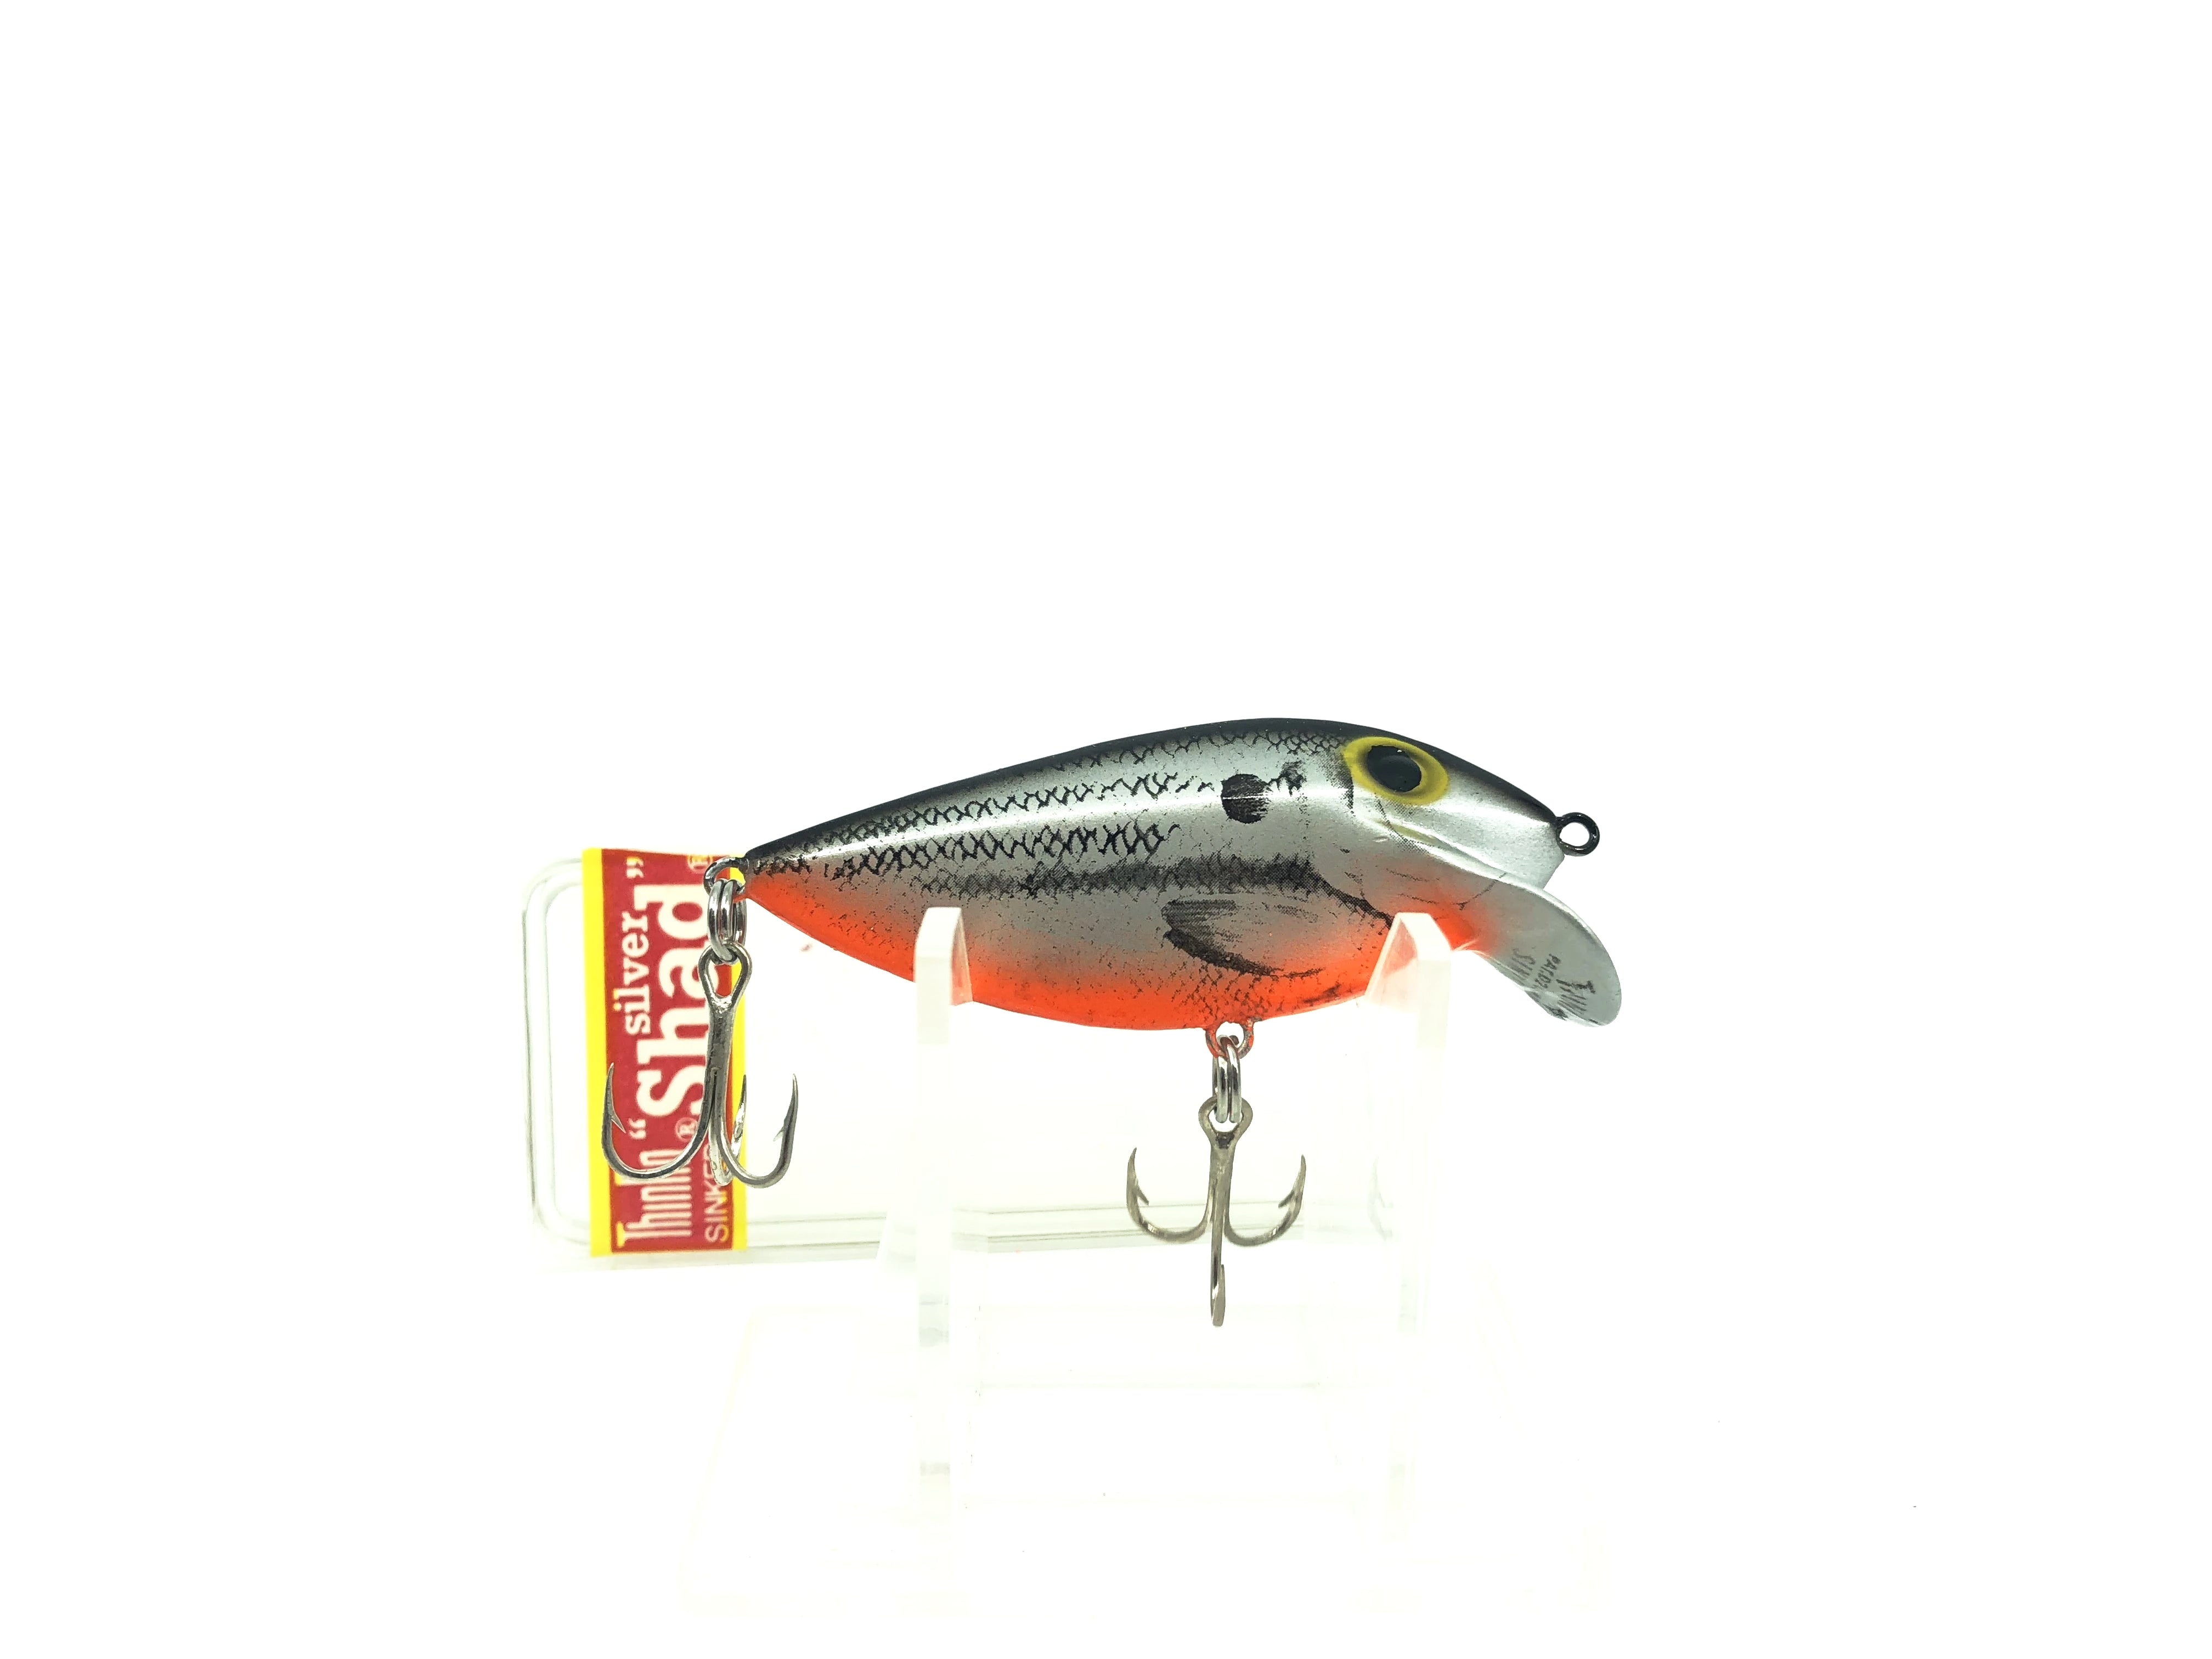 Storm Thin Fin T64 Naturalistic Shad/Orange Belly Color with Box Red Label